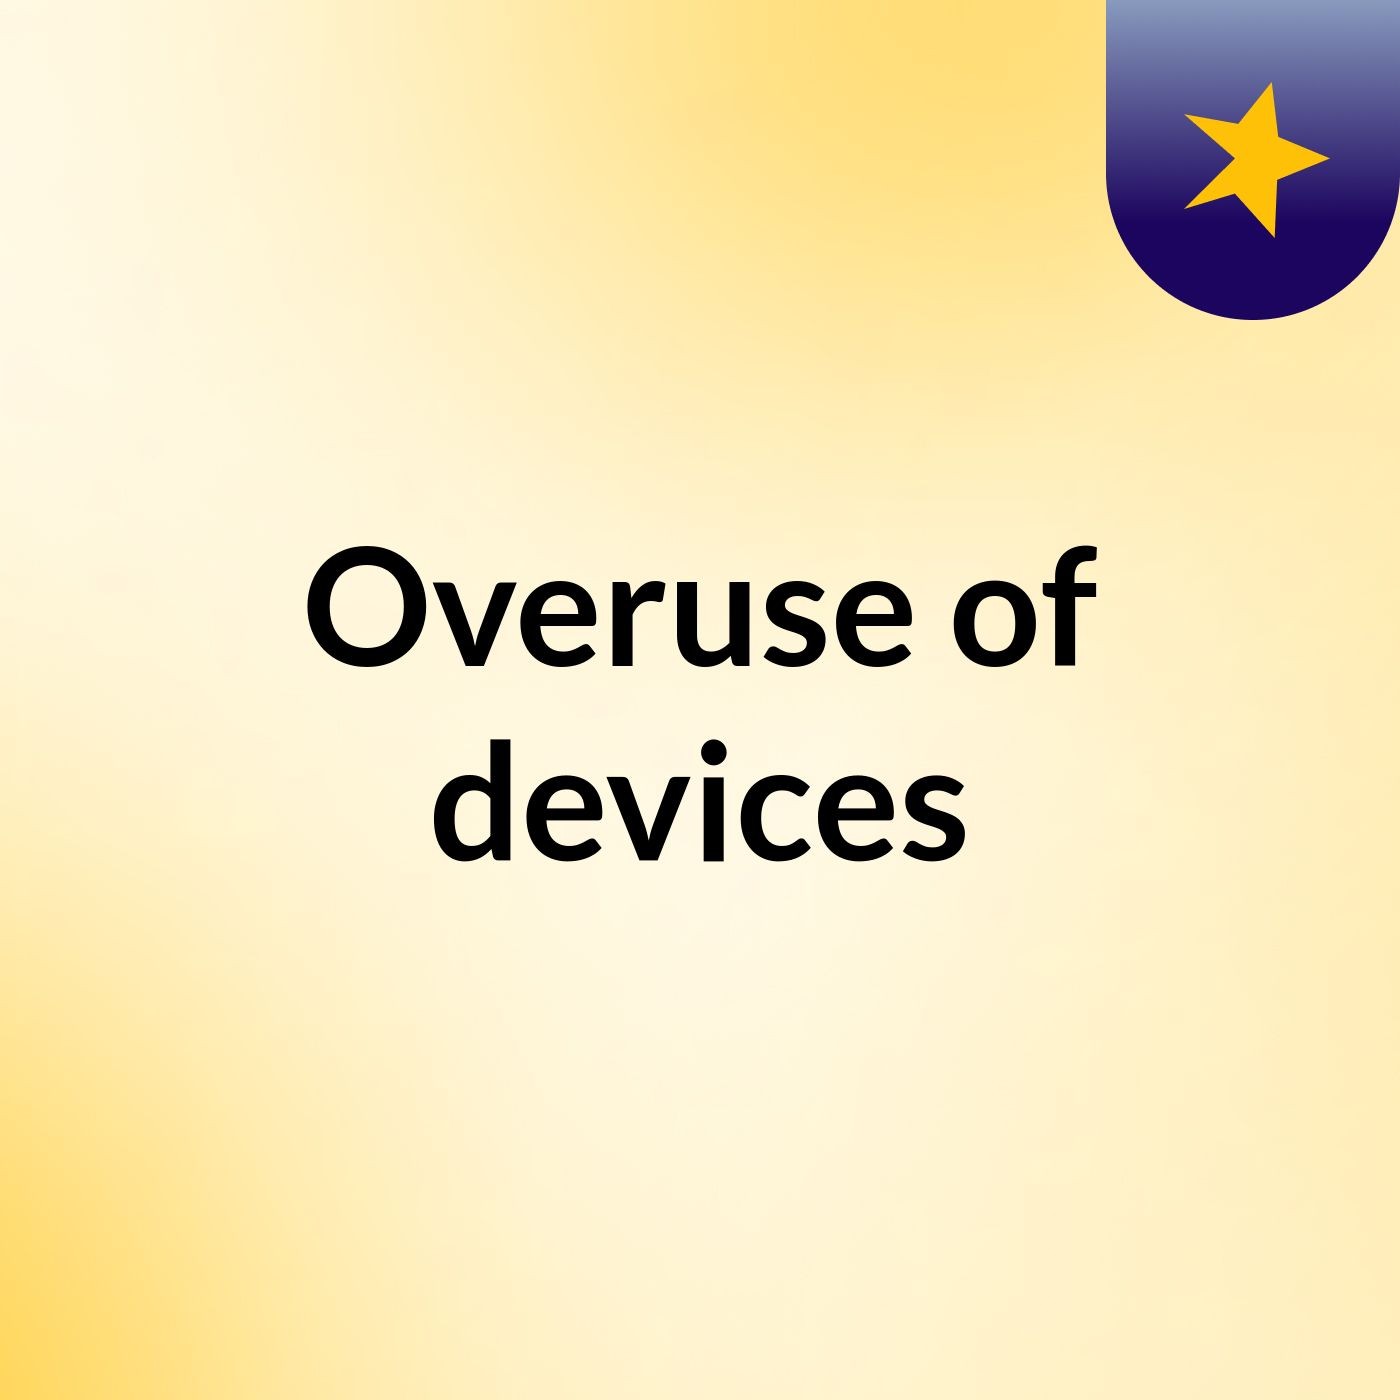 Overuse of devices